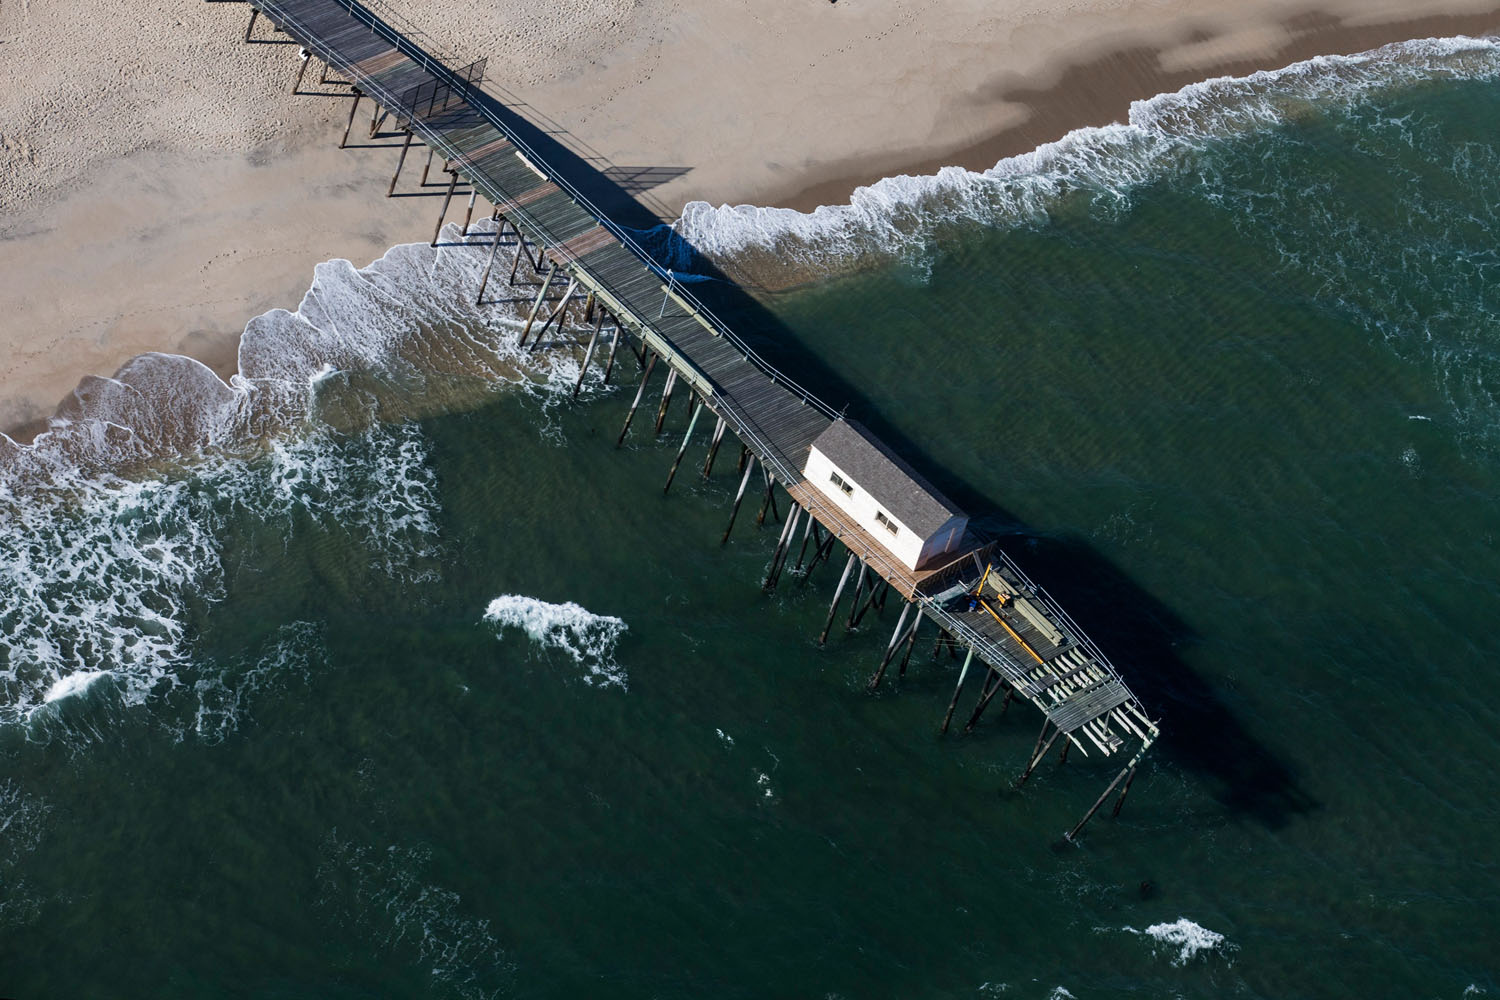 Oct. 21, 2013. A pier damaged by Superstorm Sandy in October 2012 in Long Branch, N.J.